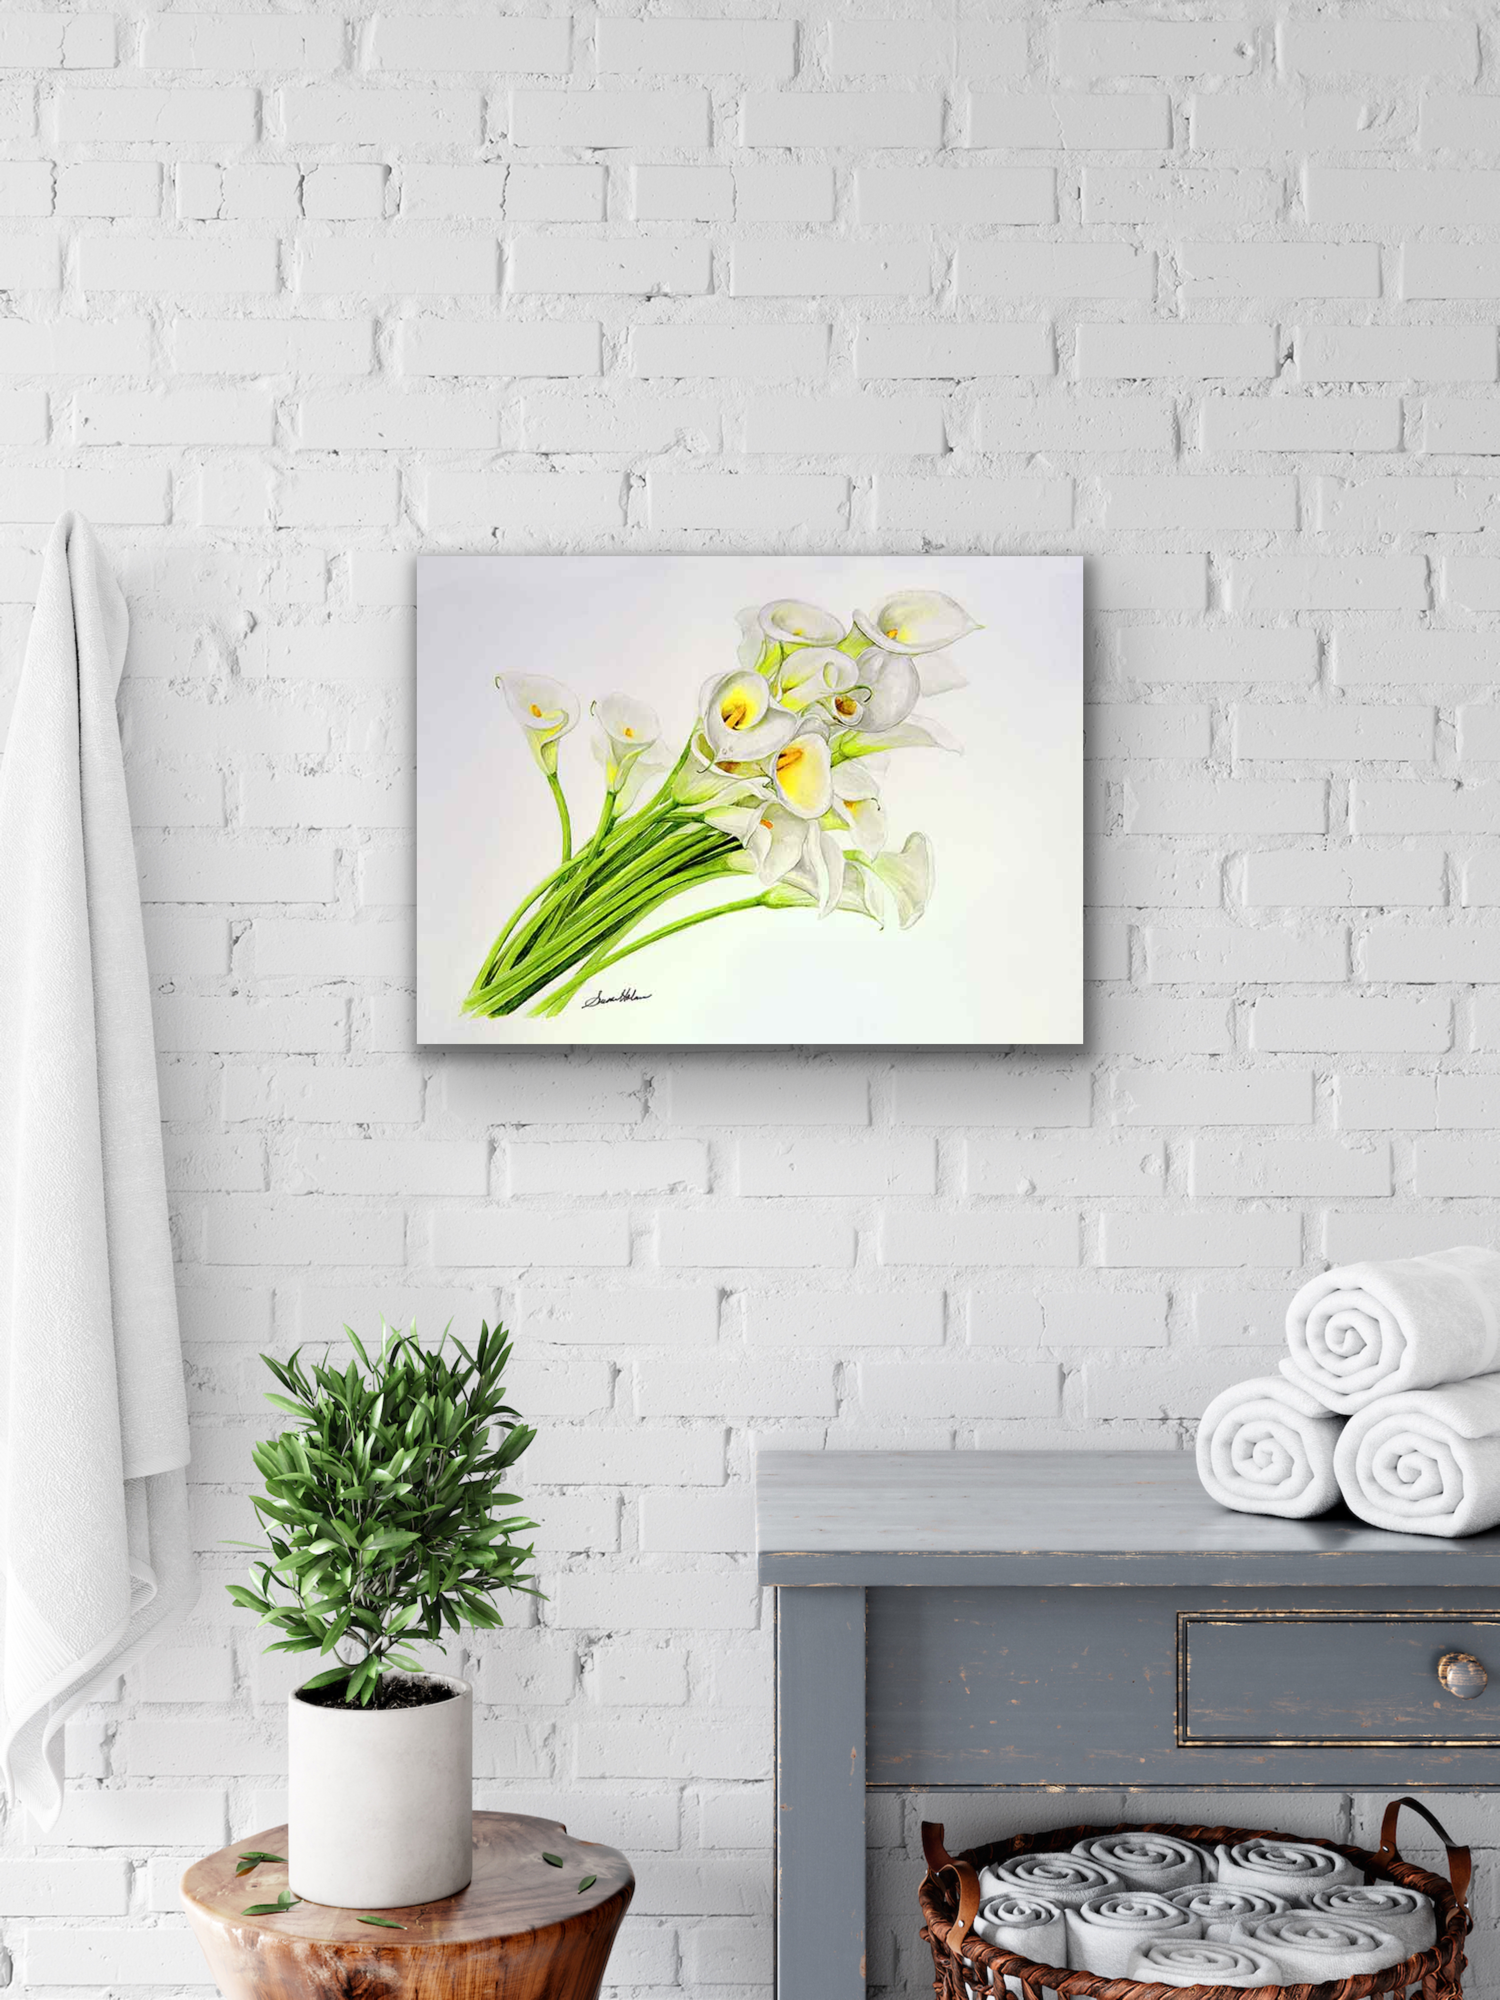 Canvas prints work very well as wall art in bathrooms.  They are more durable and resistant to moisture.